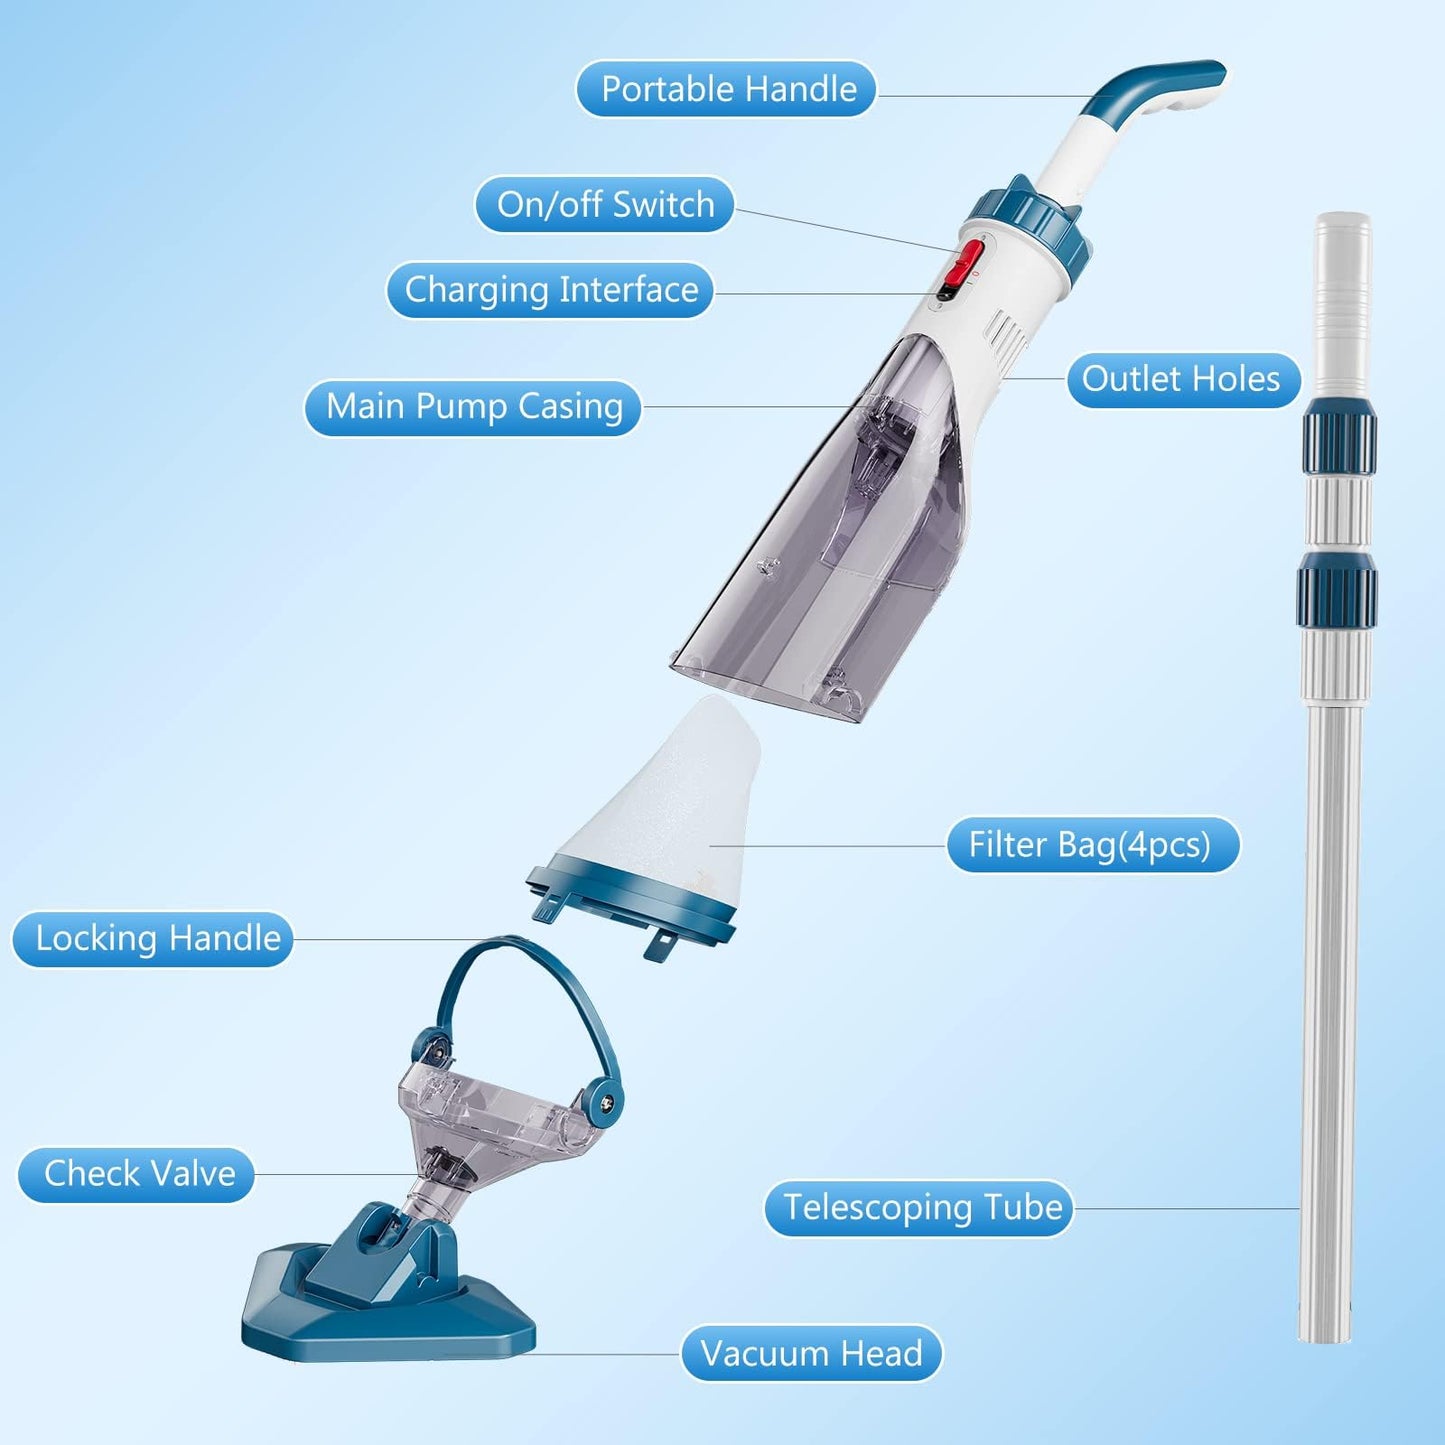 Pool Vacuum for Above Ground Pool with a Telescopic Pole, Running time up to 1H, Handheld Rechargeable Pool Cleaner with Powerful Suction up to 18.5 gallons/min, Ideal for Leaves, Debris